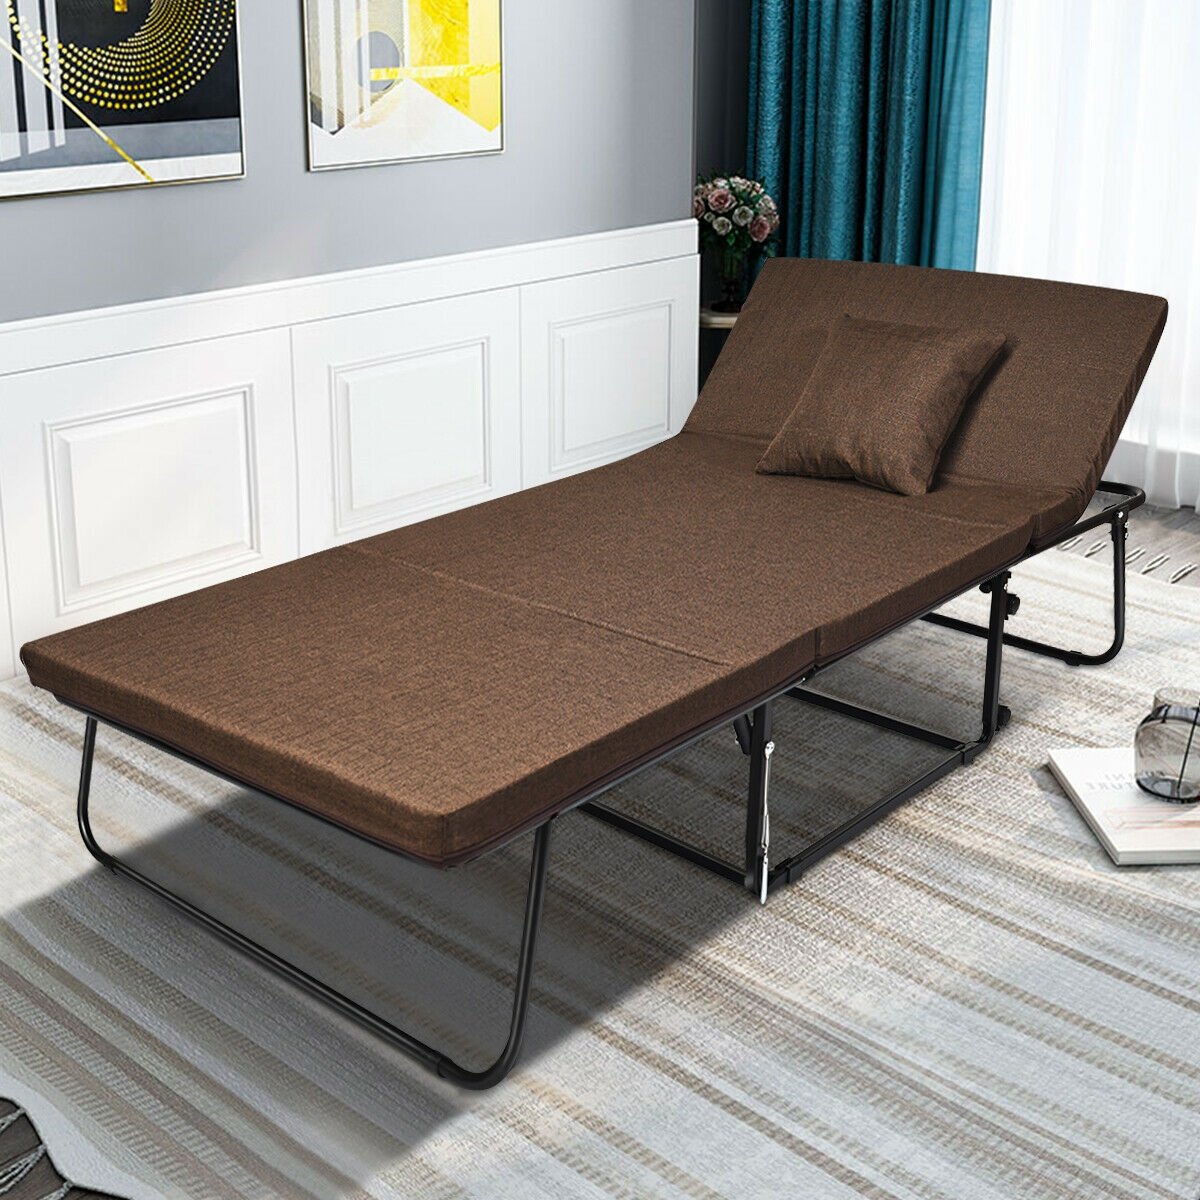 Folding Guest Sleeper Bed w/6 Position Adjustment, Brown